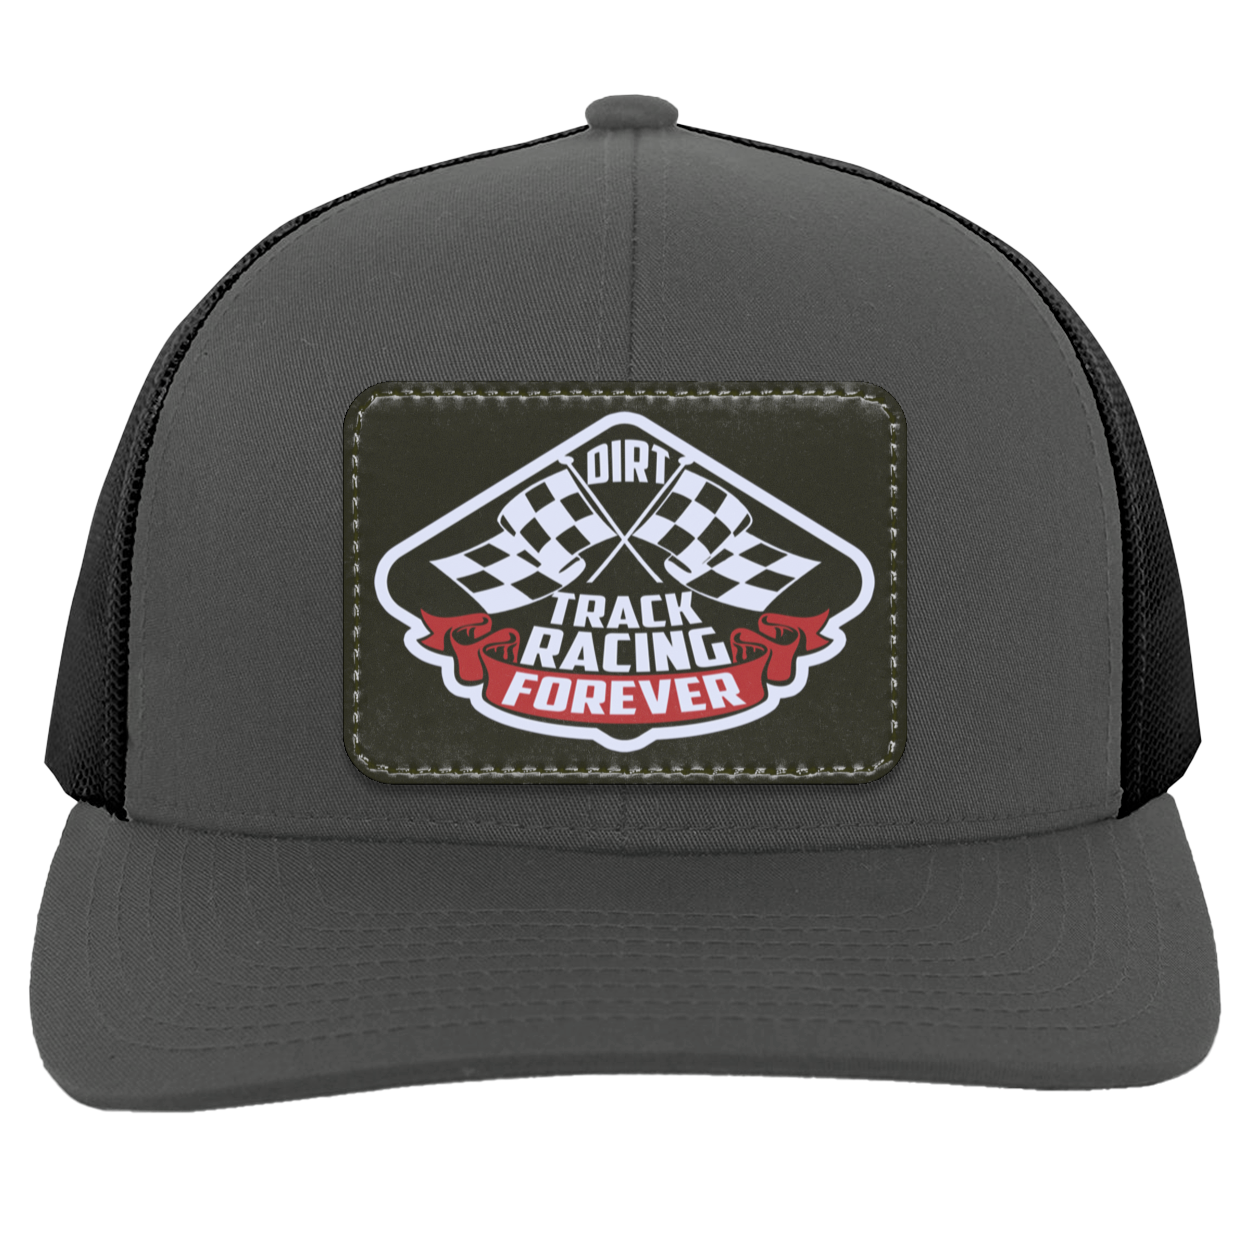 Dirt Track Racing Forever Trucker Patched Snap Back